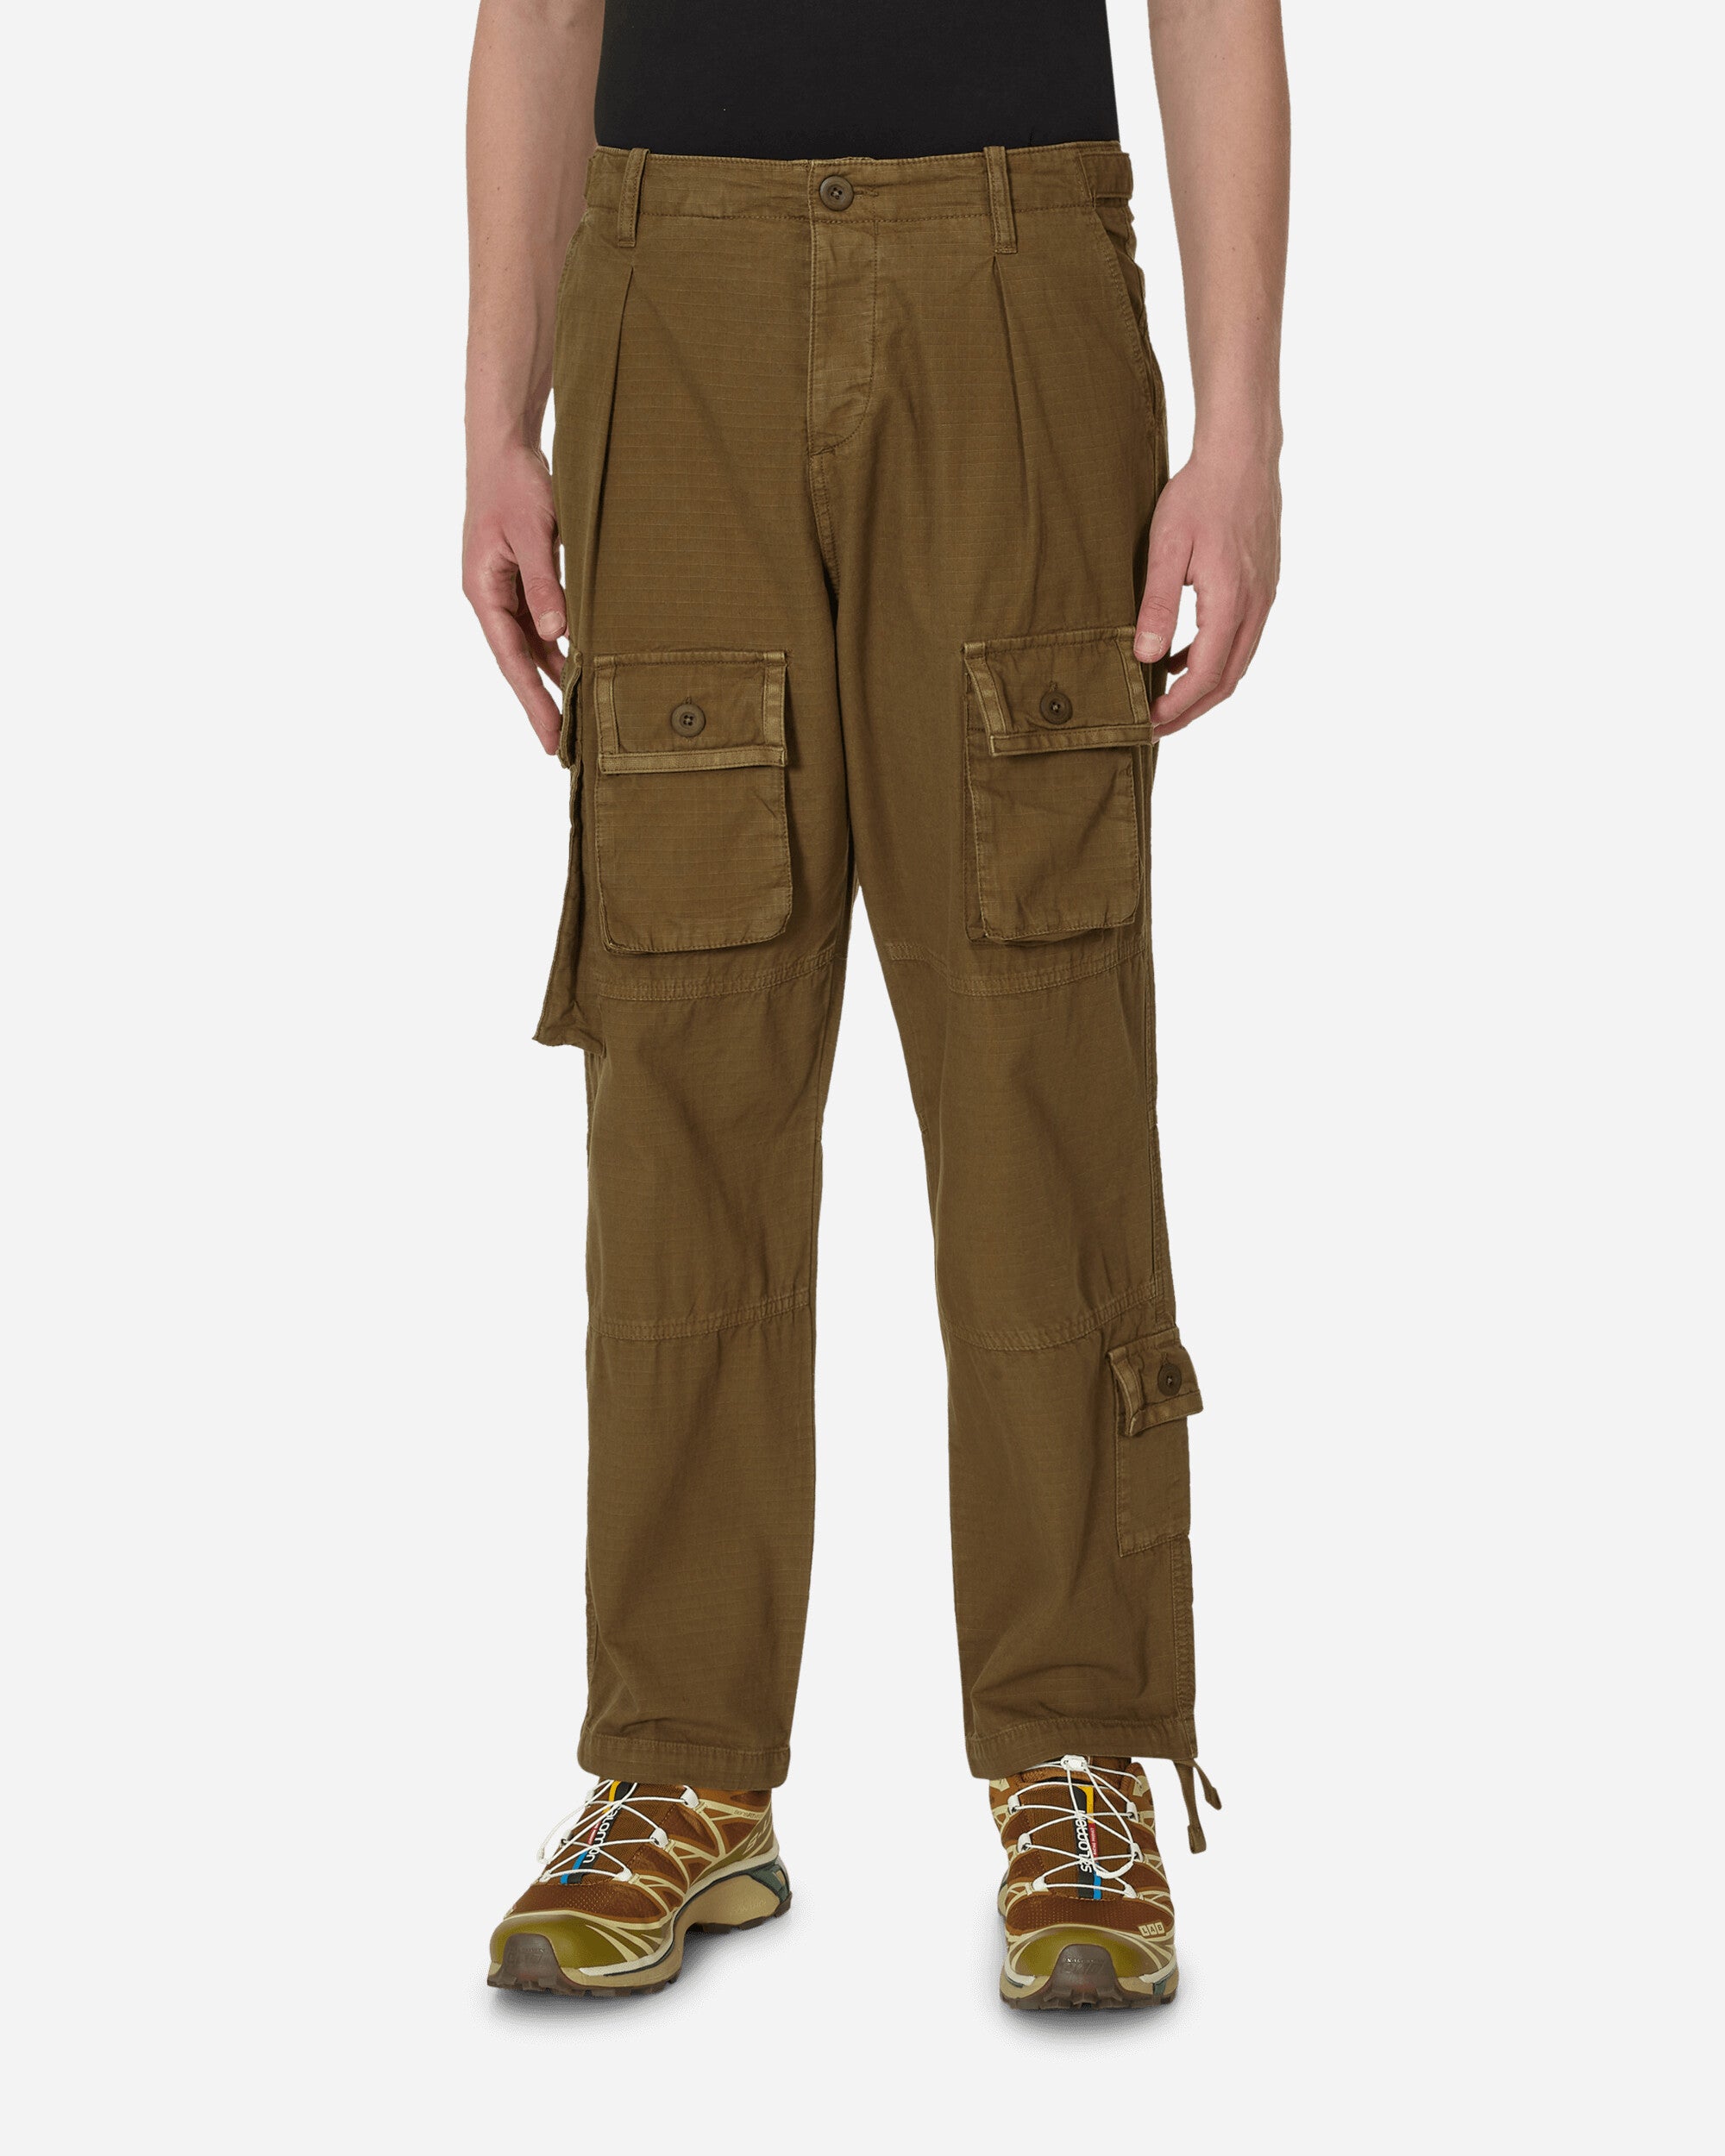 Buy t-base men's Whiskey Cotton Solid Cargo Pant for Men online India